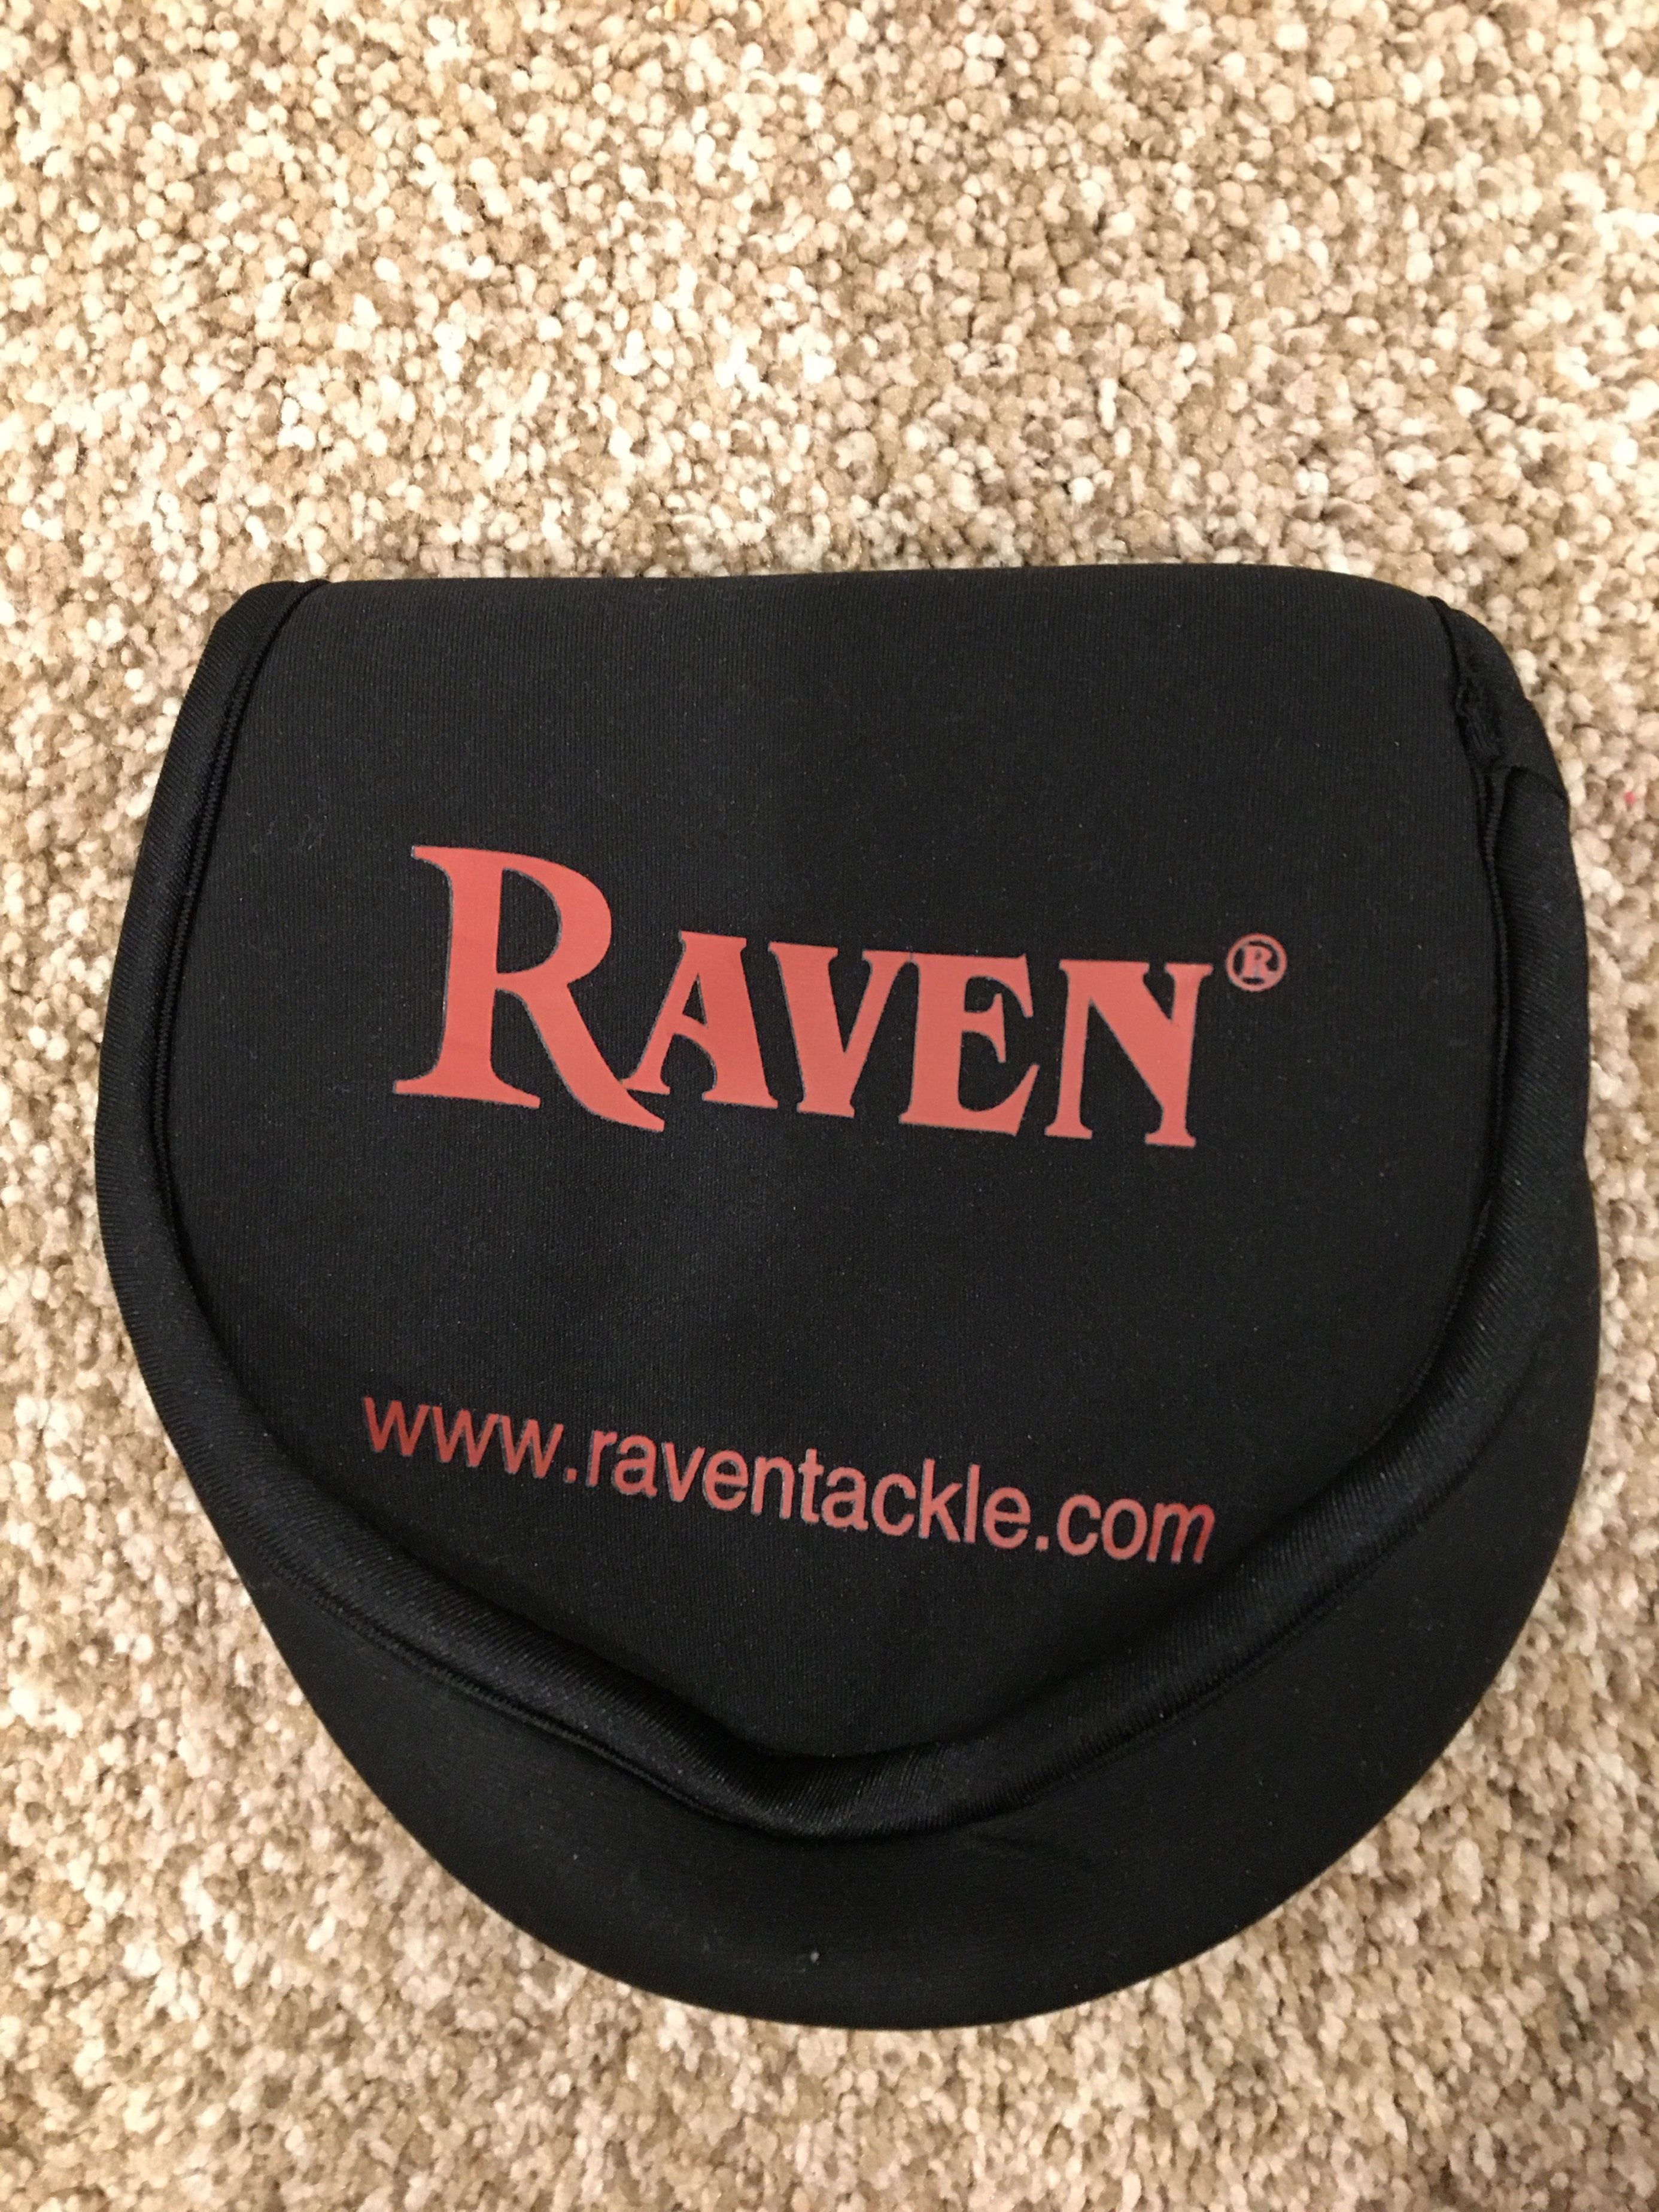 For Sale Raven Matrix xl fully ported - Classifieds - Buy, Sell, Trade or  Rent - Lake Ontario United - Lake Ontario's Largest Fishing & Hunting  Community - New York and Ontario Canada